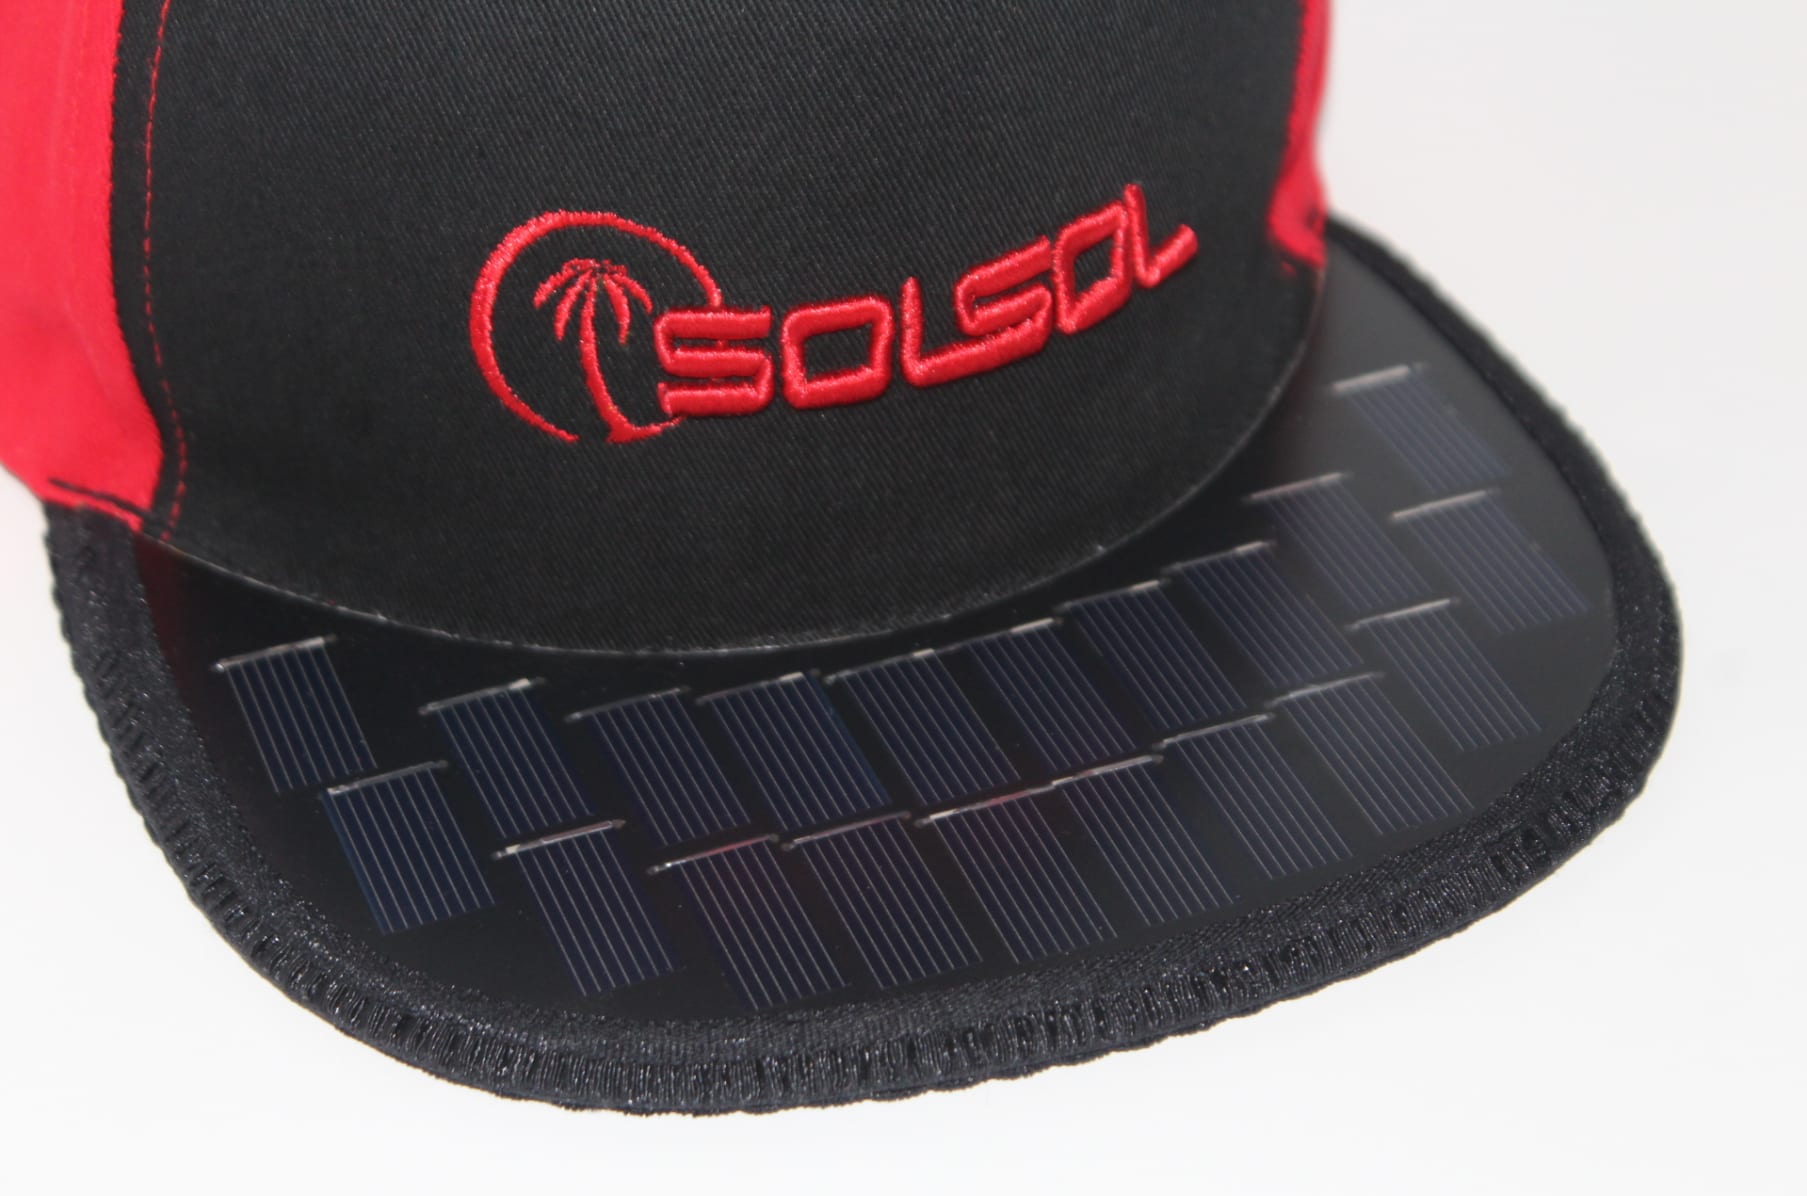 The SOLSOL Revolution Is Here!